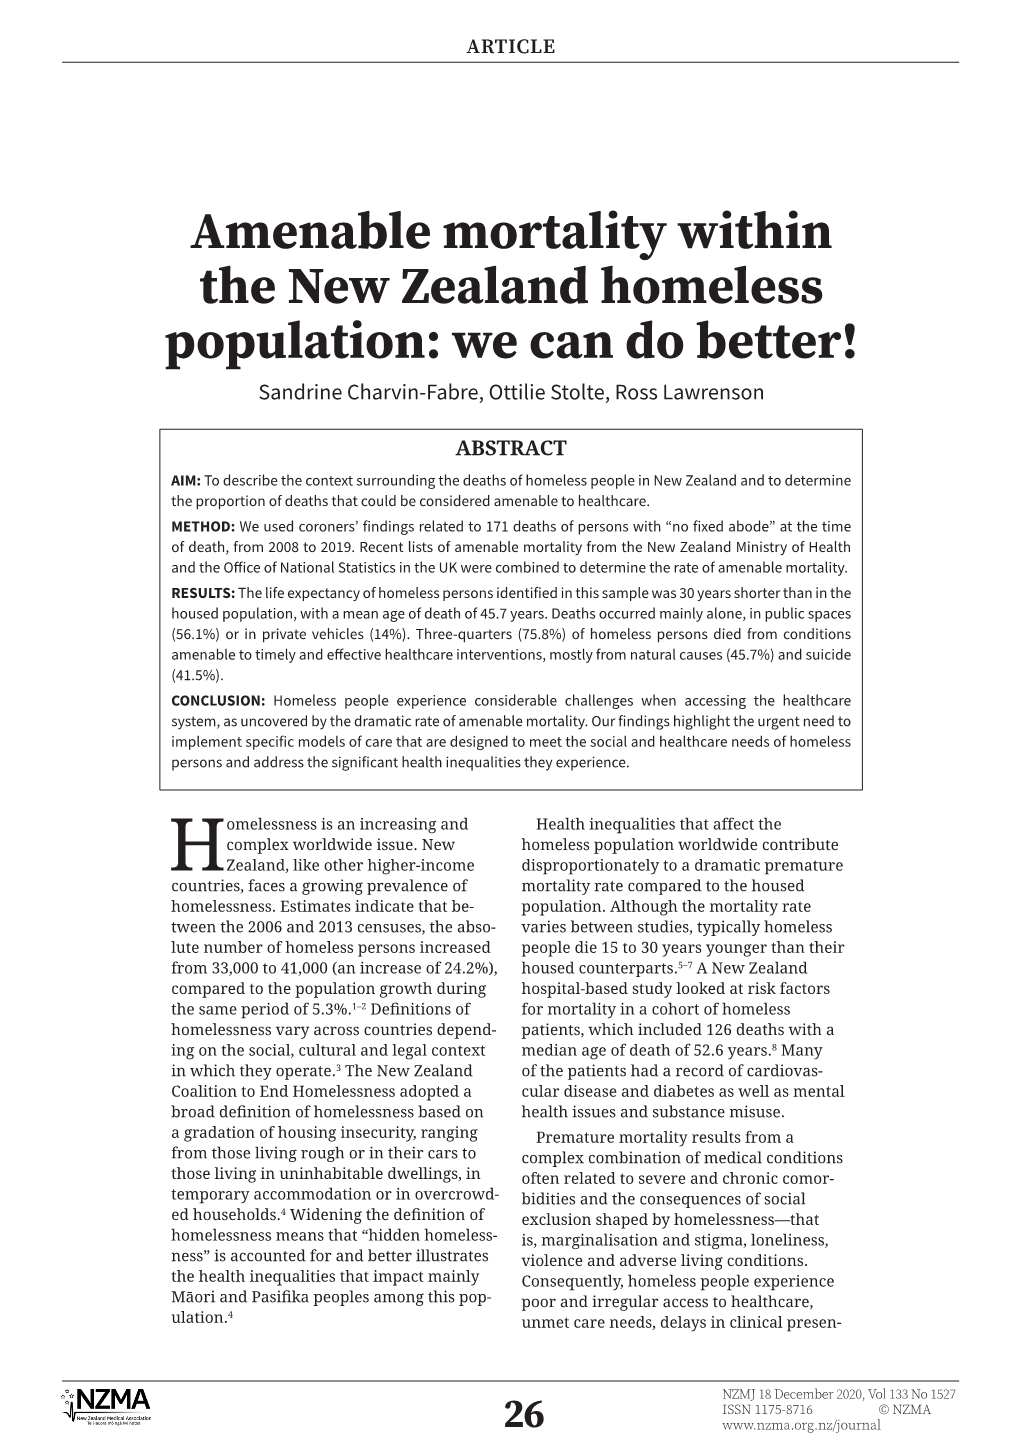 Amenable Mortality Within the New Zealand Homeless Population: We Can Do Better! Sandrine Charvin-Fabre, Ottilie Stolte, Ross Lawrenson